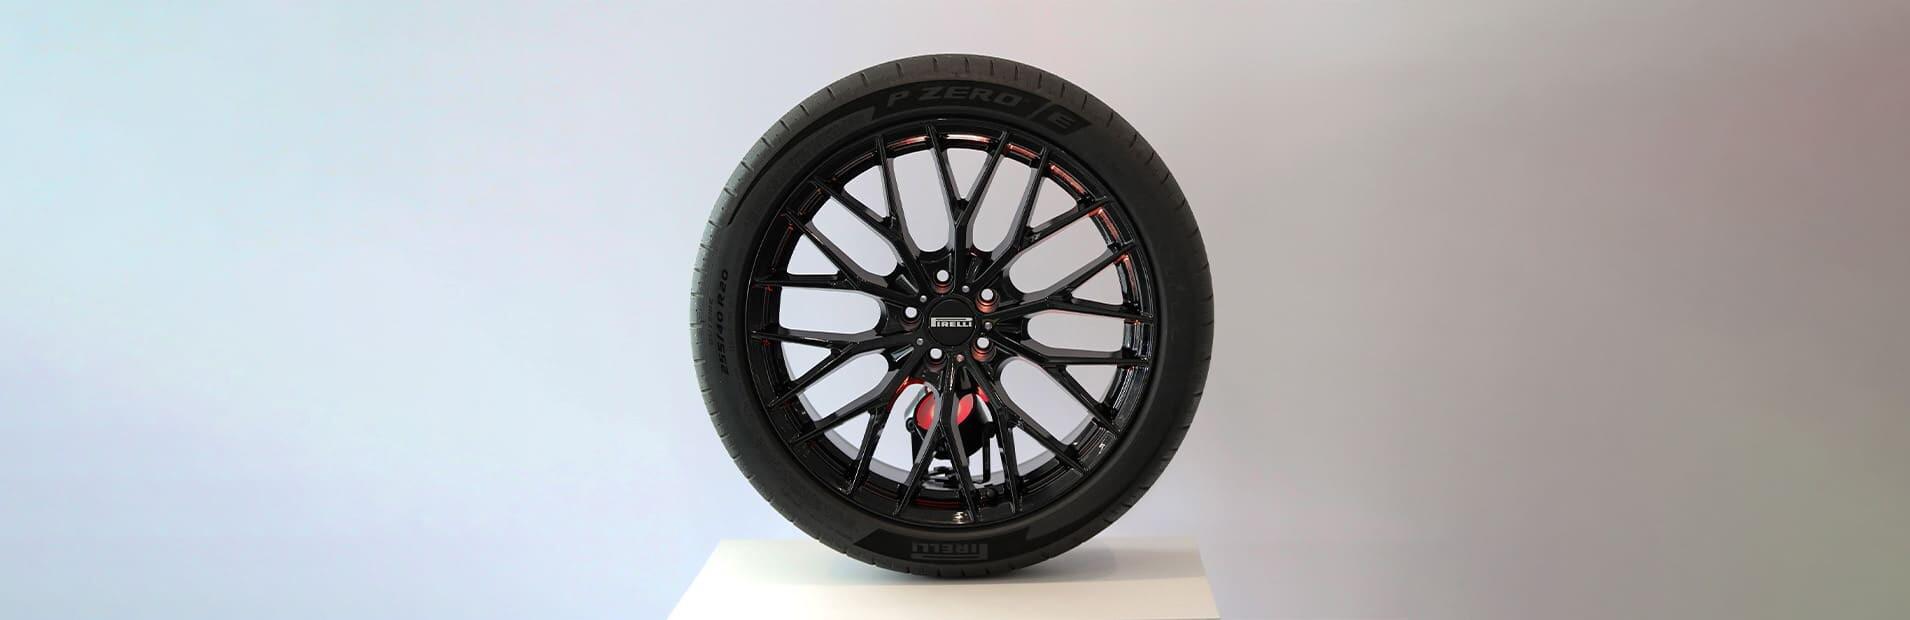 Pirelli Elect, the favourite technology for BEV and PHEV innovations